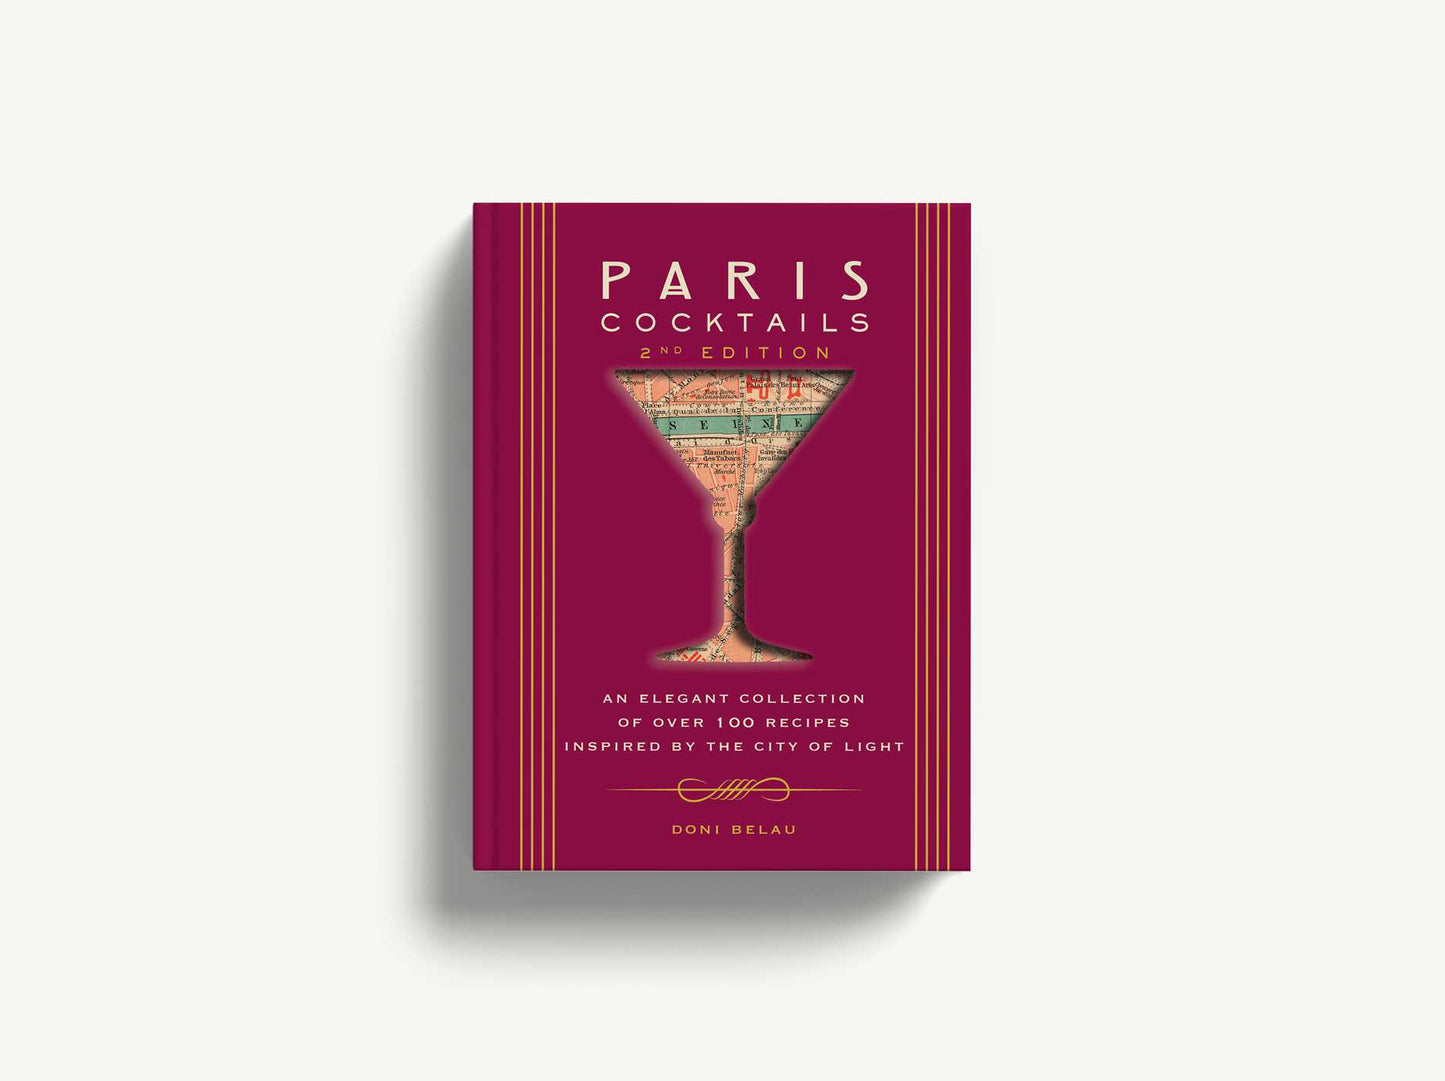 Paris Cocktails, Second Edition: An Elegant Collection of Over 100 Recipes Inspired by the City of Light